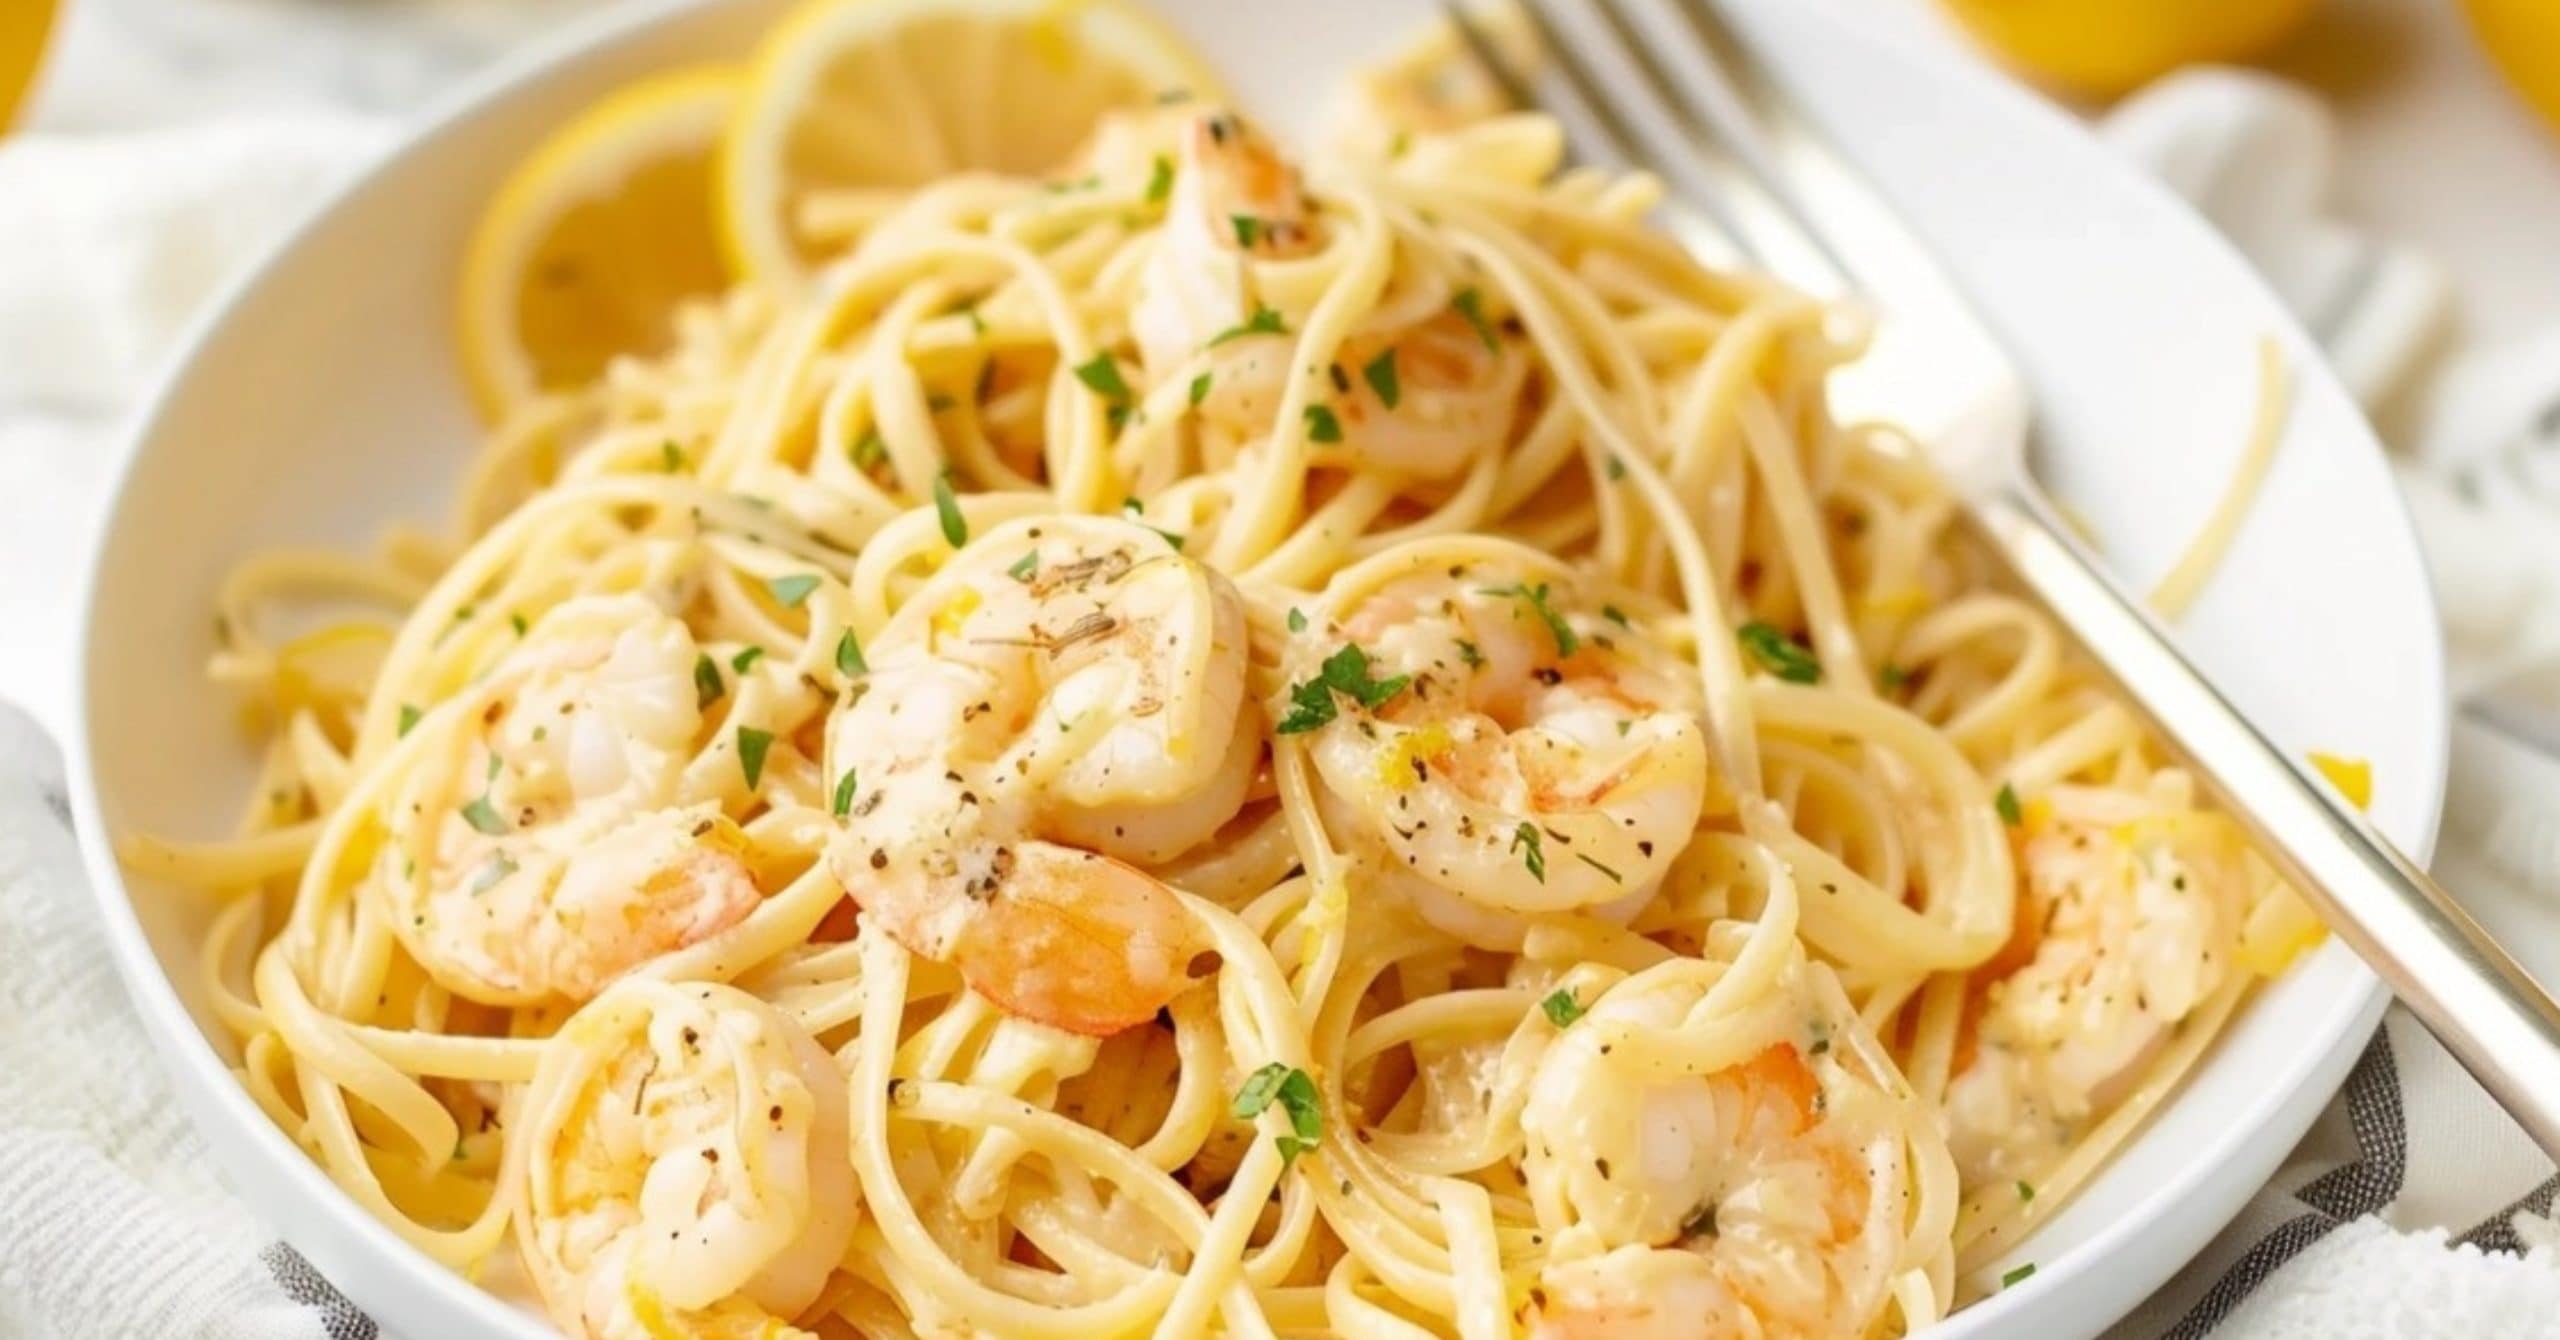 Pasta with shrimp garnished with chopped parsley on a white plate.